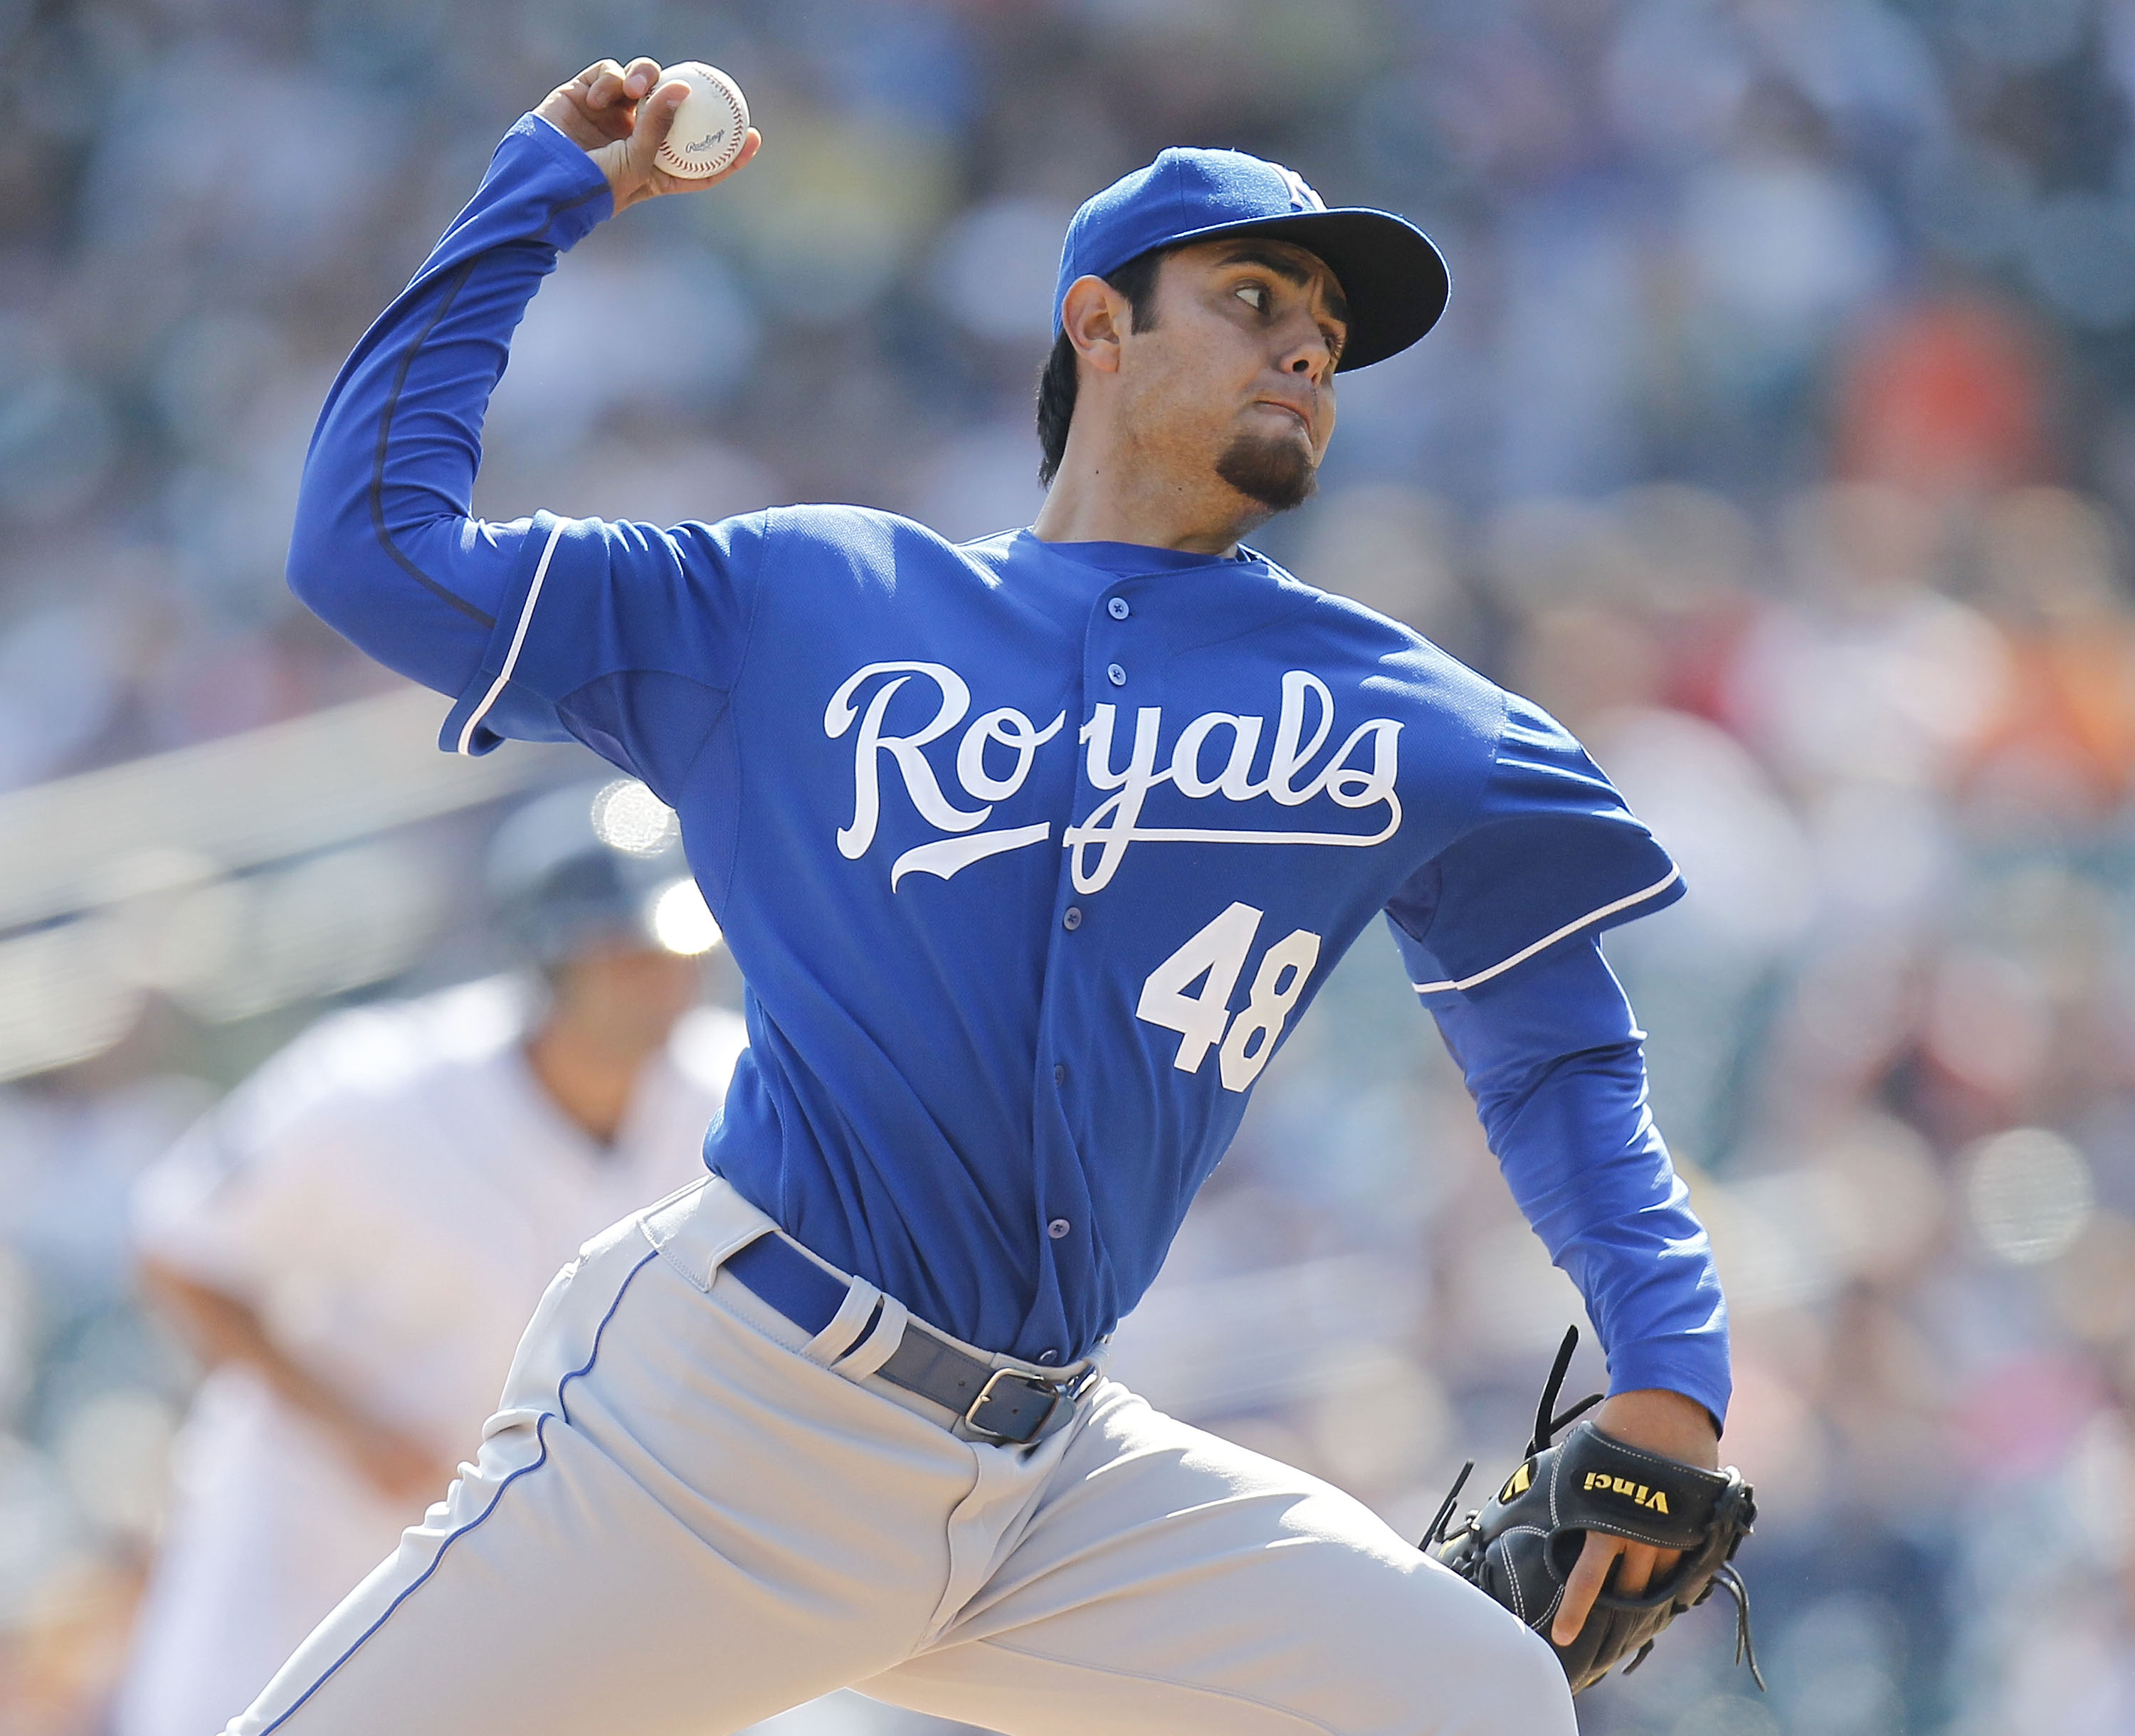 Wanted: A new nickname for Joakim Soria, Sports